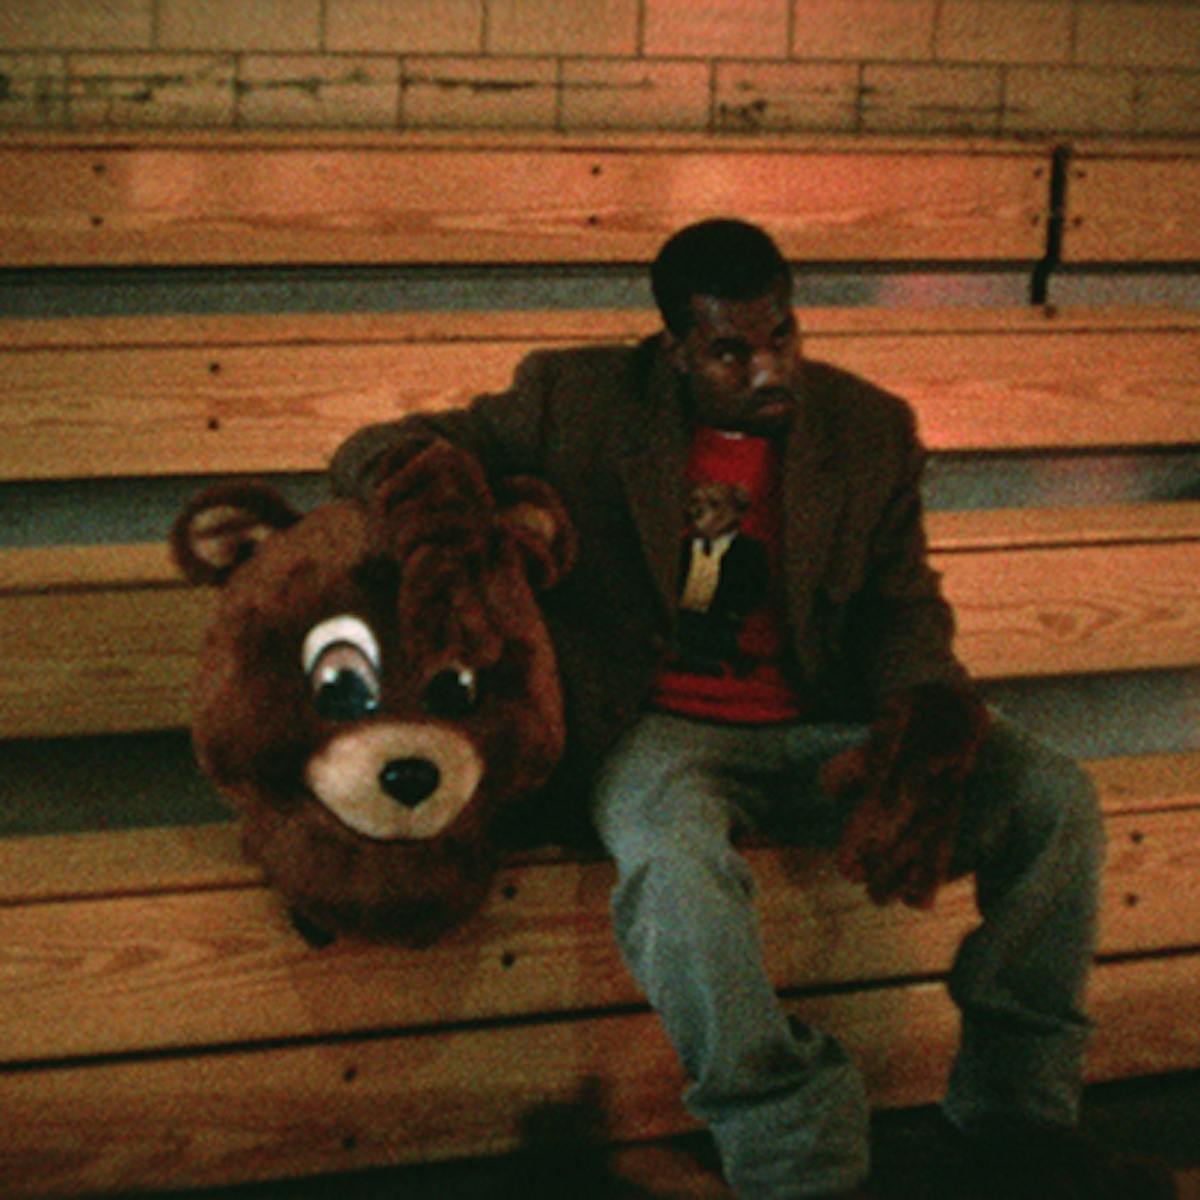 Kanye West wears jeans and a brown jacket and sits on wooden bleachers next to a massive stuffed bears head.